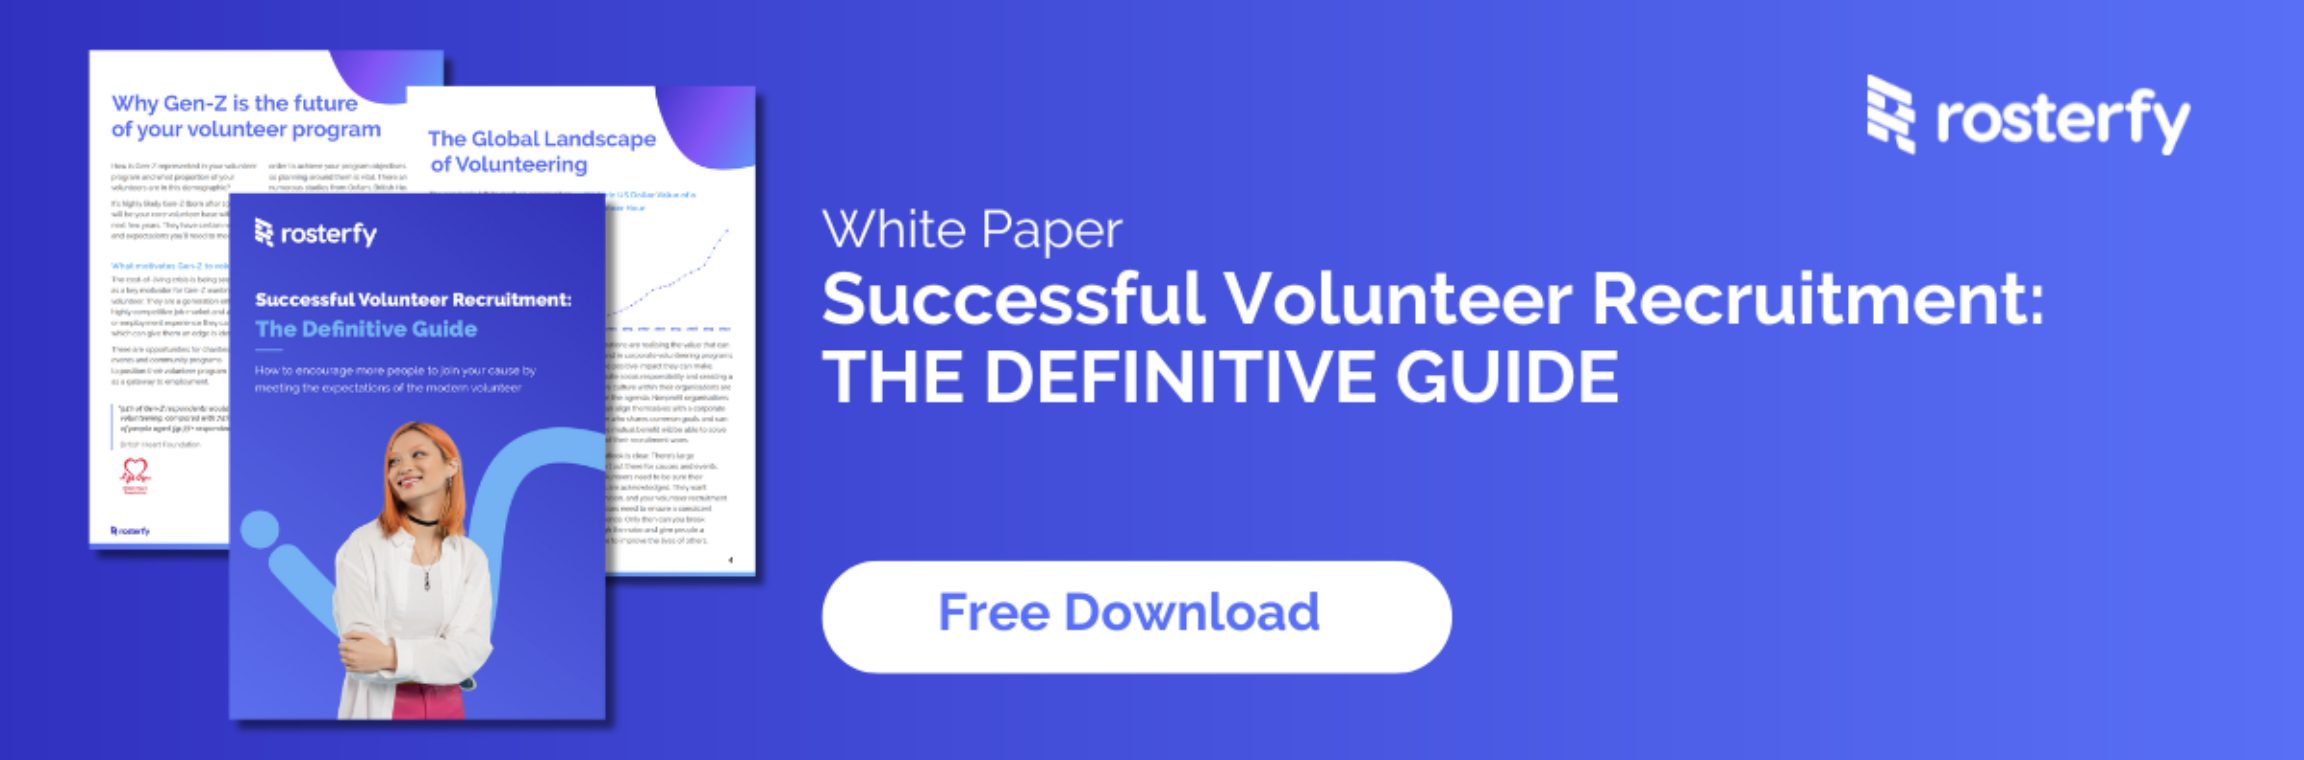 https://www.rosterfy.com/successful-volunteer-recruitment-white-paper